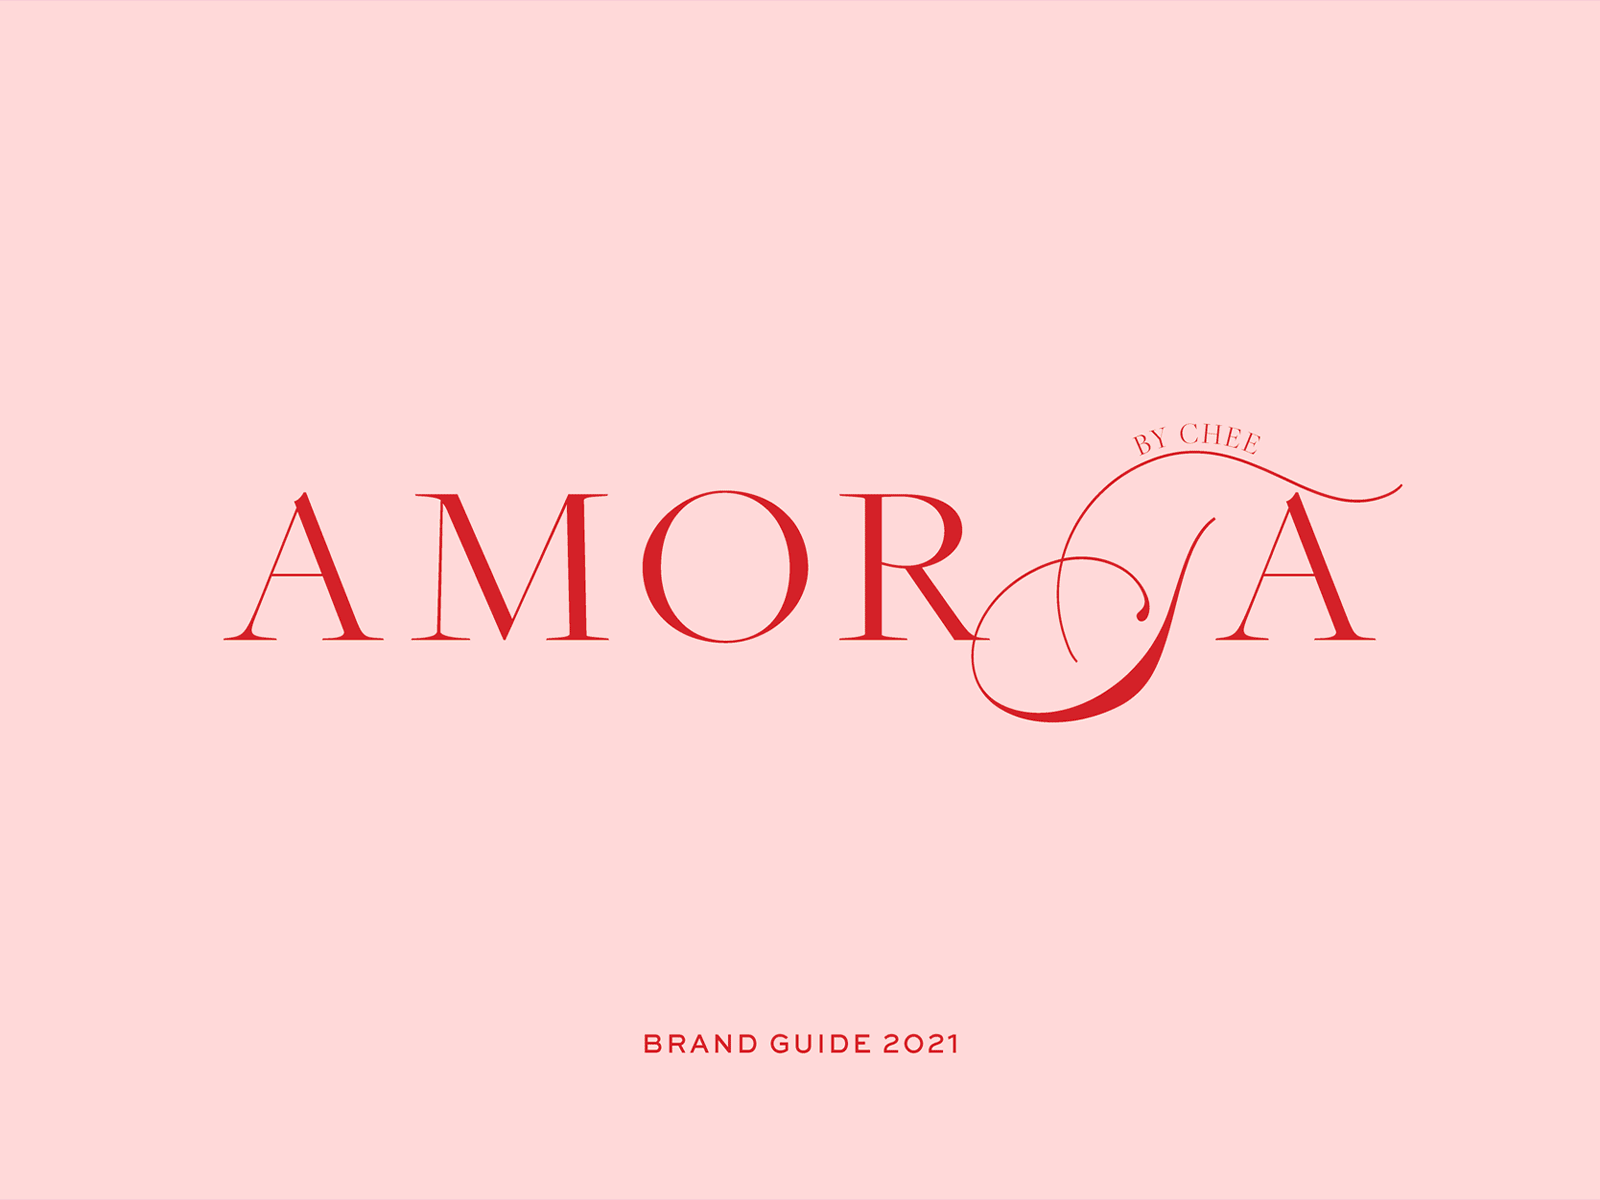 AMORTA BY CHEE - Brand Guide I brand analysis brand guide brand guidelines brand strategy branding colour theory design graphic design illustration logo logo design typography